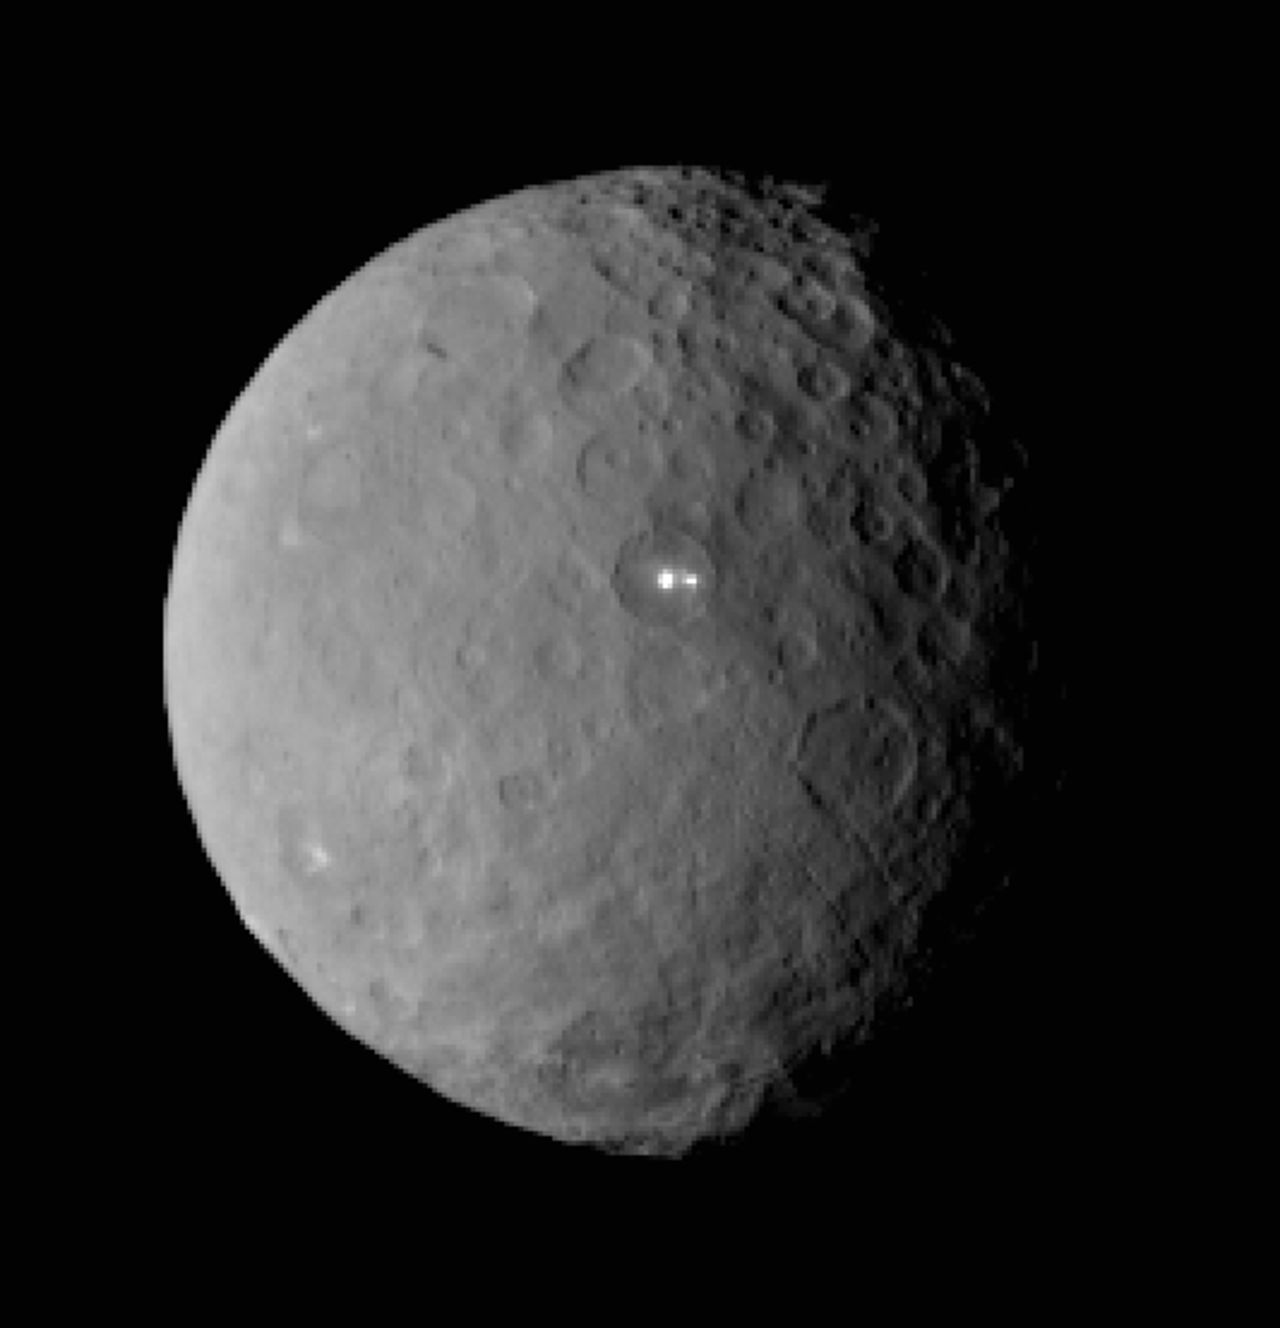 NASA's <a href="http://www.nasa.gov/mission_pages/dawn/main/index.html" target="_blank" target="_blank">Dawn</a> spacecraft began orbiting the dwarf planet Ceres in March. Scientists were surprised by the large white spots shining on Ceres, seen above. On its way to Ceres, Dawn spent time studying the proto-planet Vesta in 2001. Ceres and Vesta are the two most massive bodies in the main asteroid belt between Mars and Jupiter. The mission, launched in 2007, is giving scientists new knowledge of how the solar system formed and evolved.